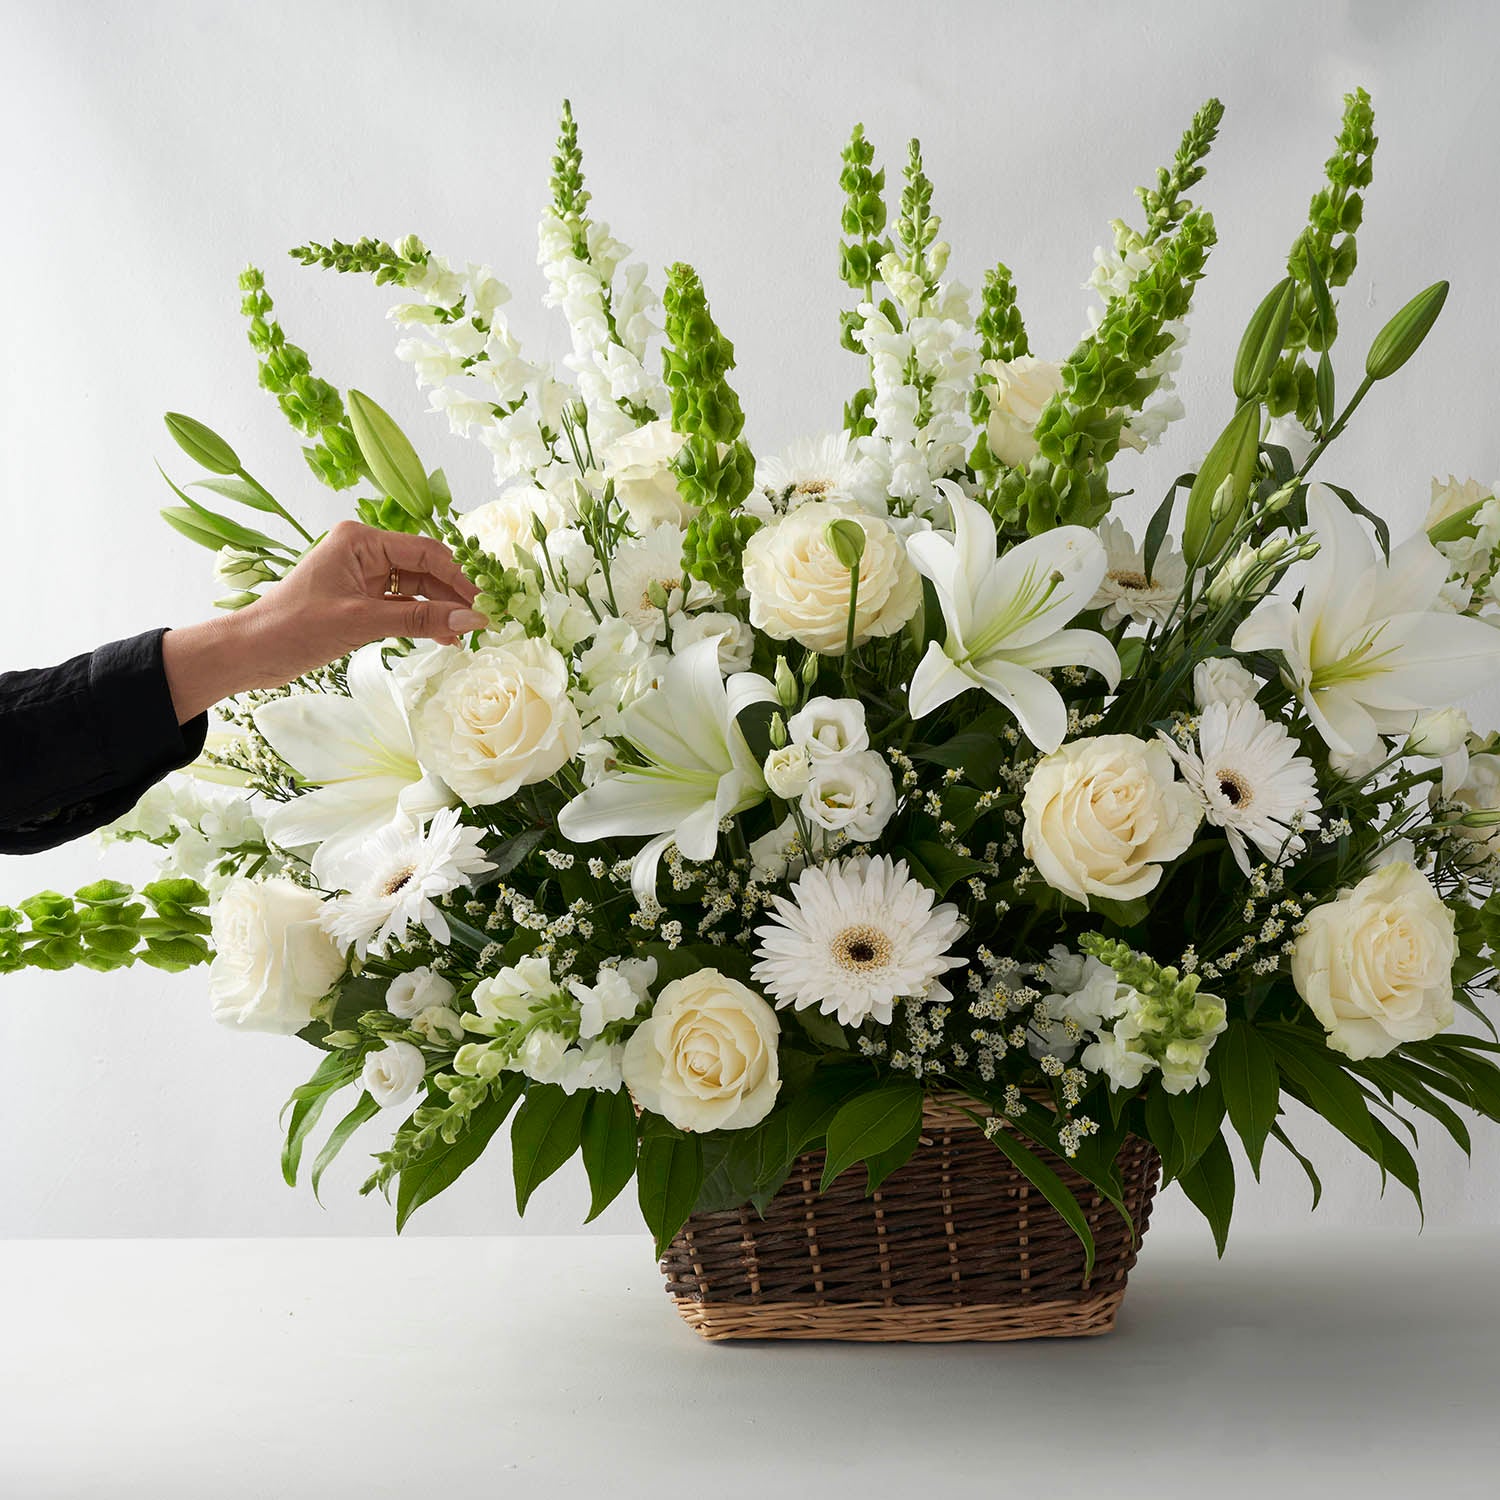 One hand adjusting flowers in an arrangement of all white flowers in a natural basket.